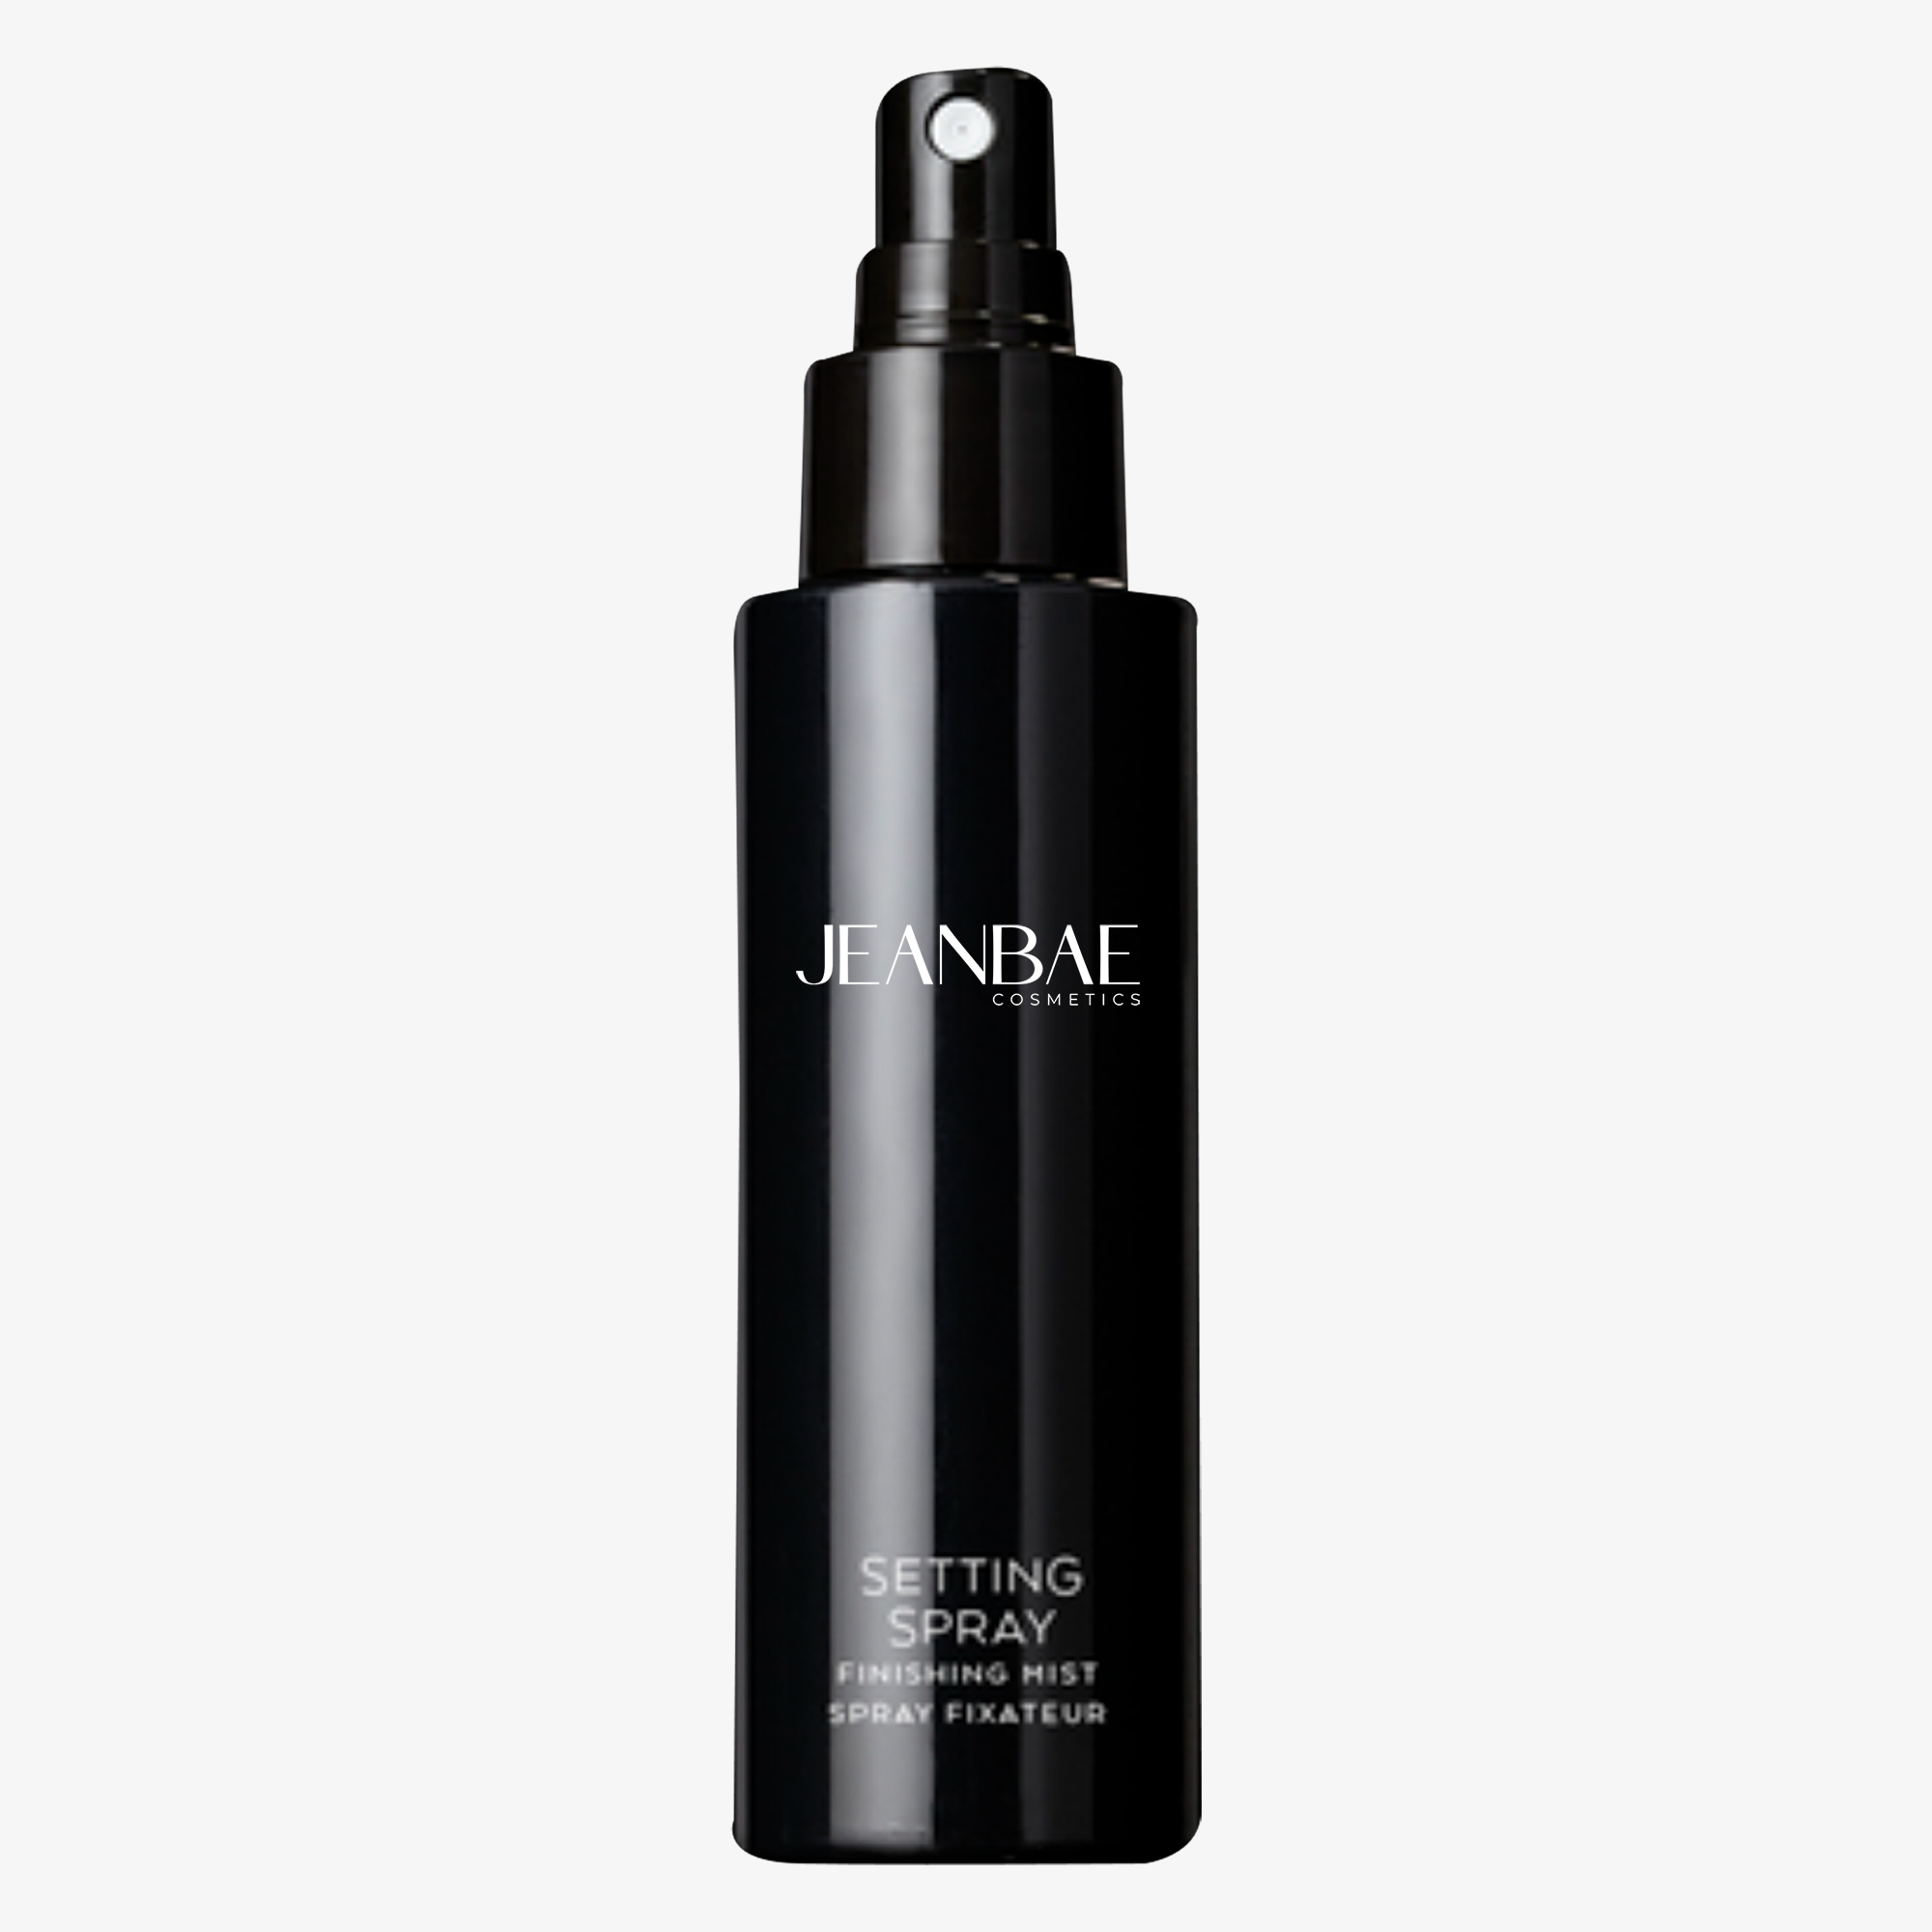 A continuous, air-powered spray delivers an even and controlled application. The micro-fine mist sets liquid or powder makeup with a radiant, long-wearing finish.  THIS PRODUCT IS Cruelty-Free, Hypoallergenic, Non-Comedogenic, Halal Certified, and EU Compliant. Free of Parabens and Fragrances.